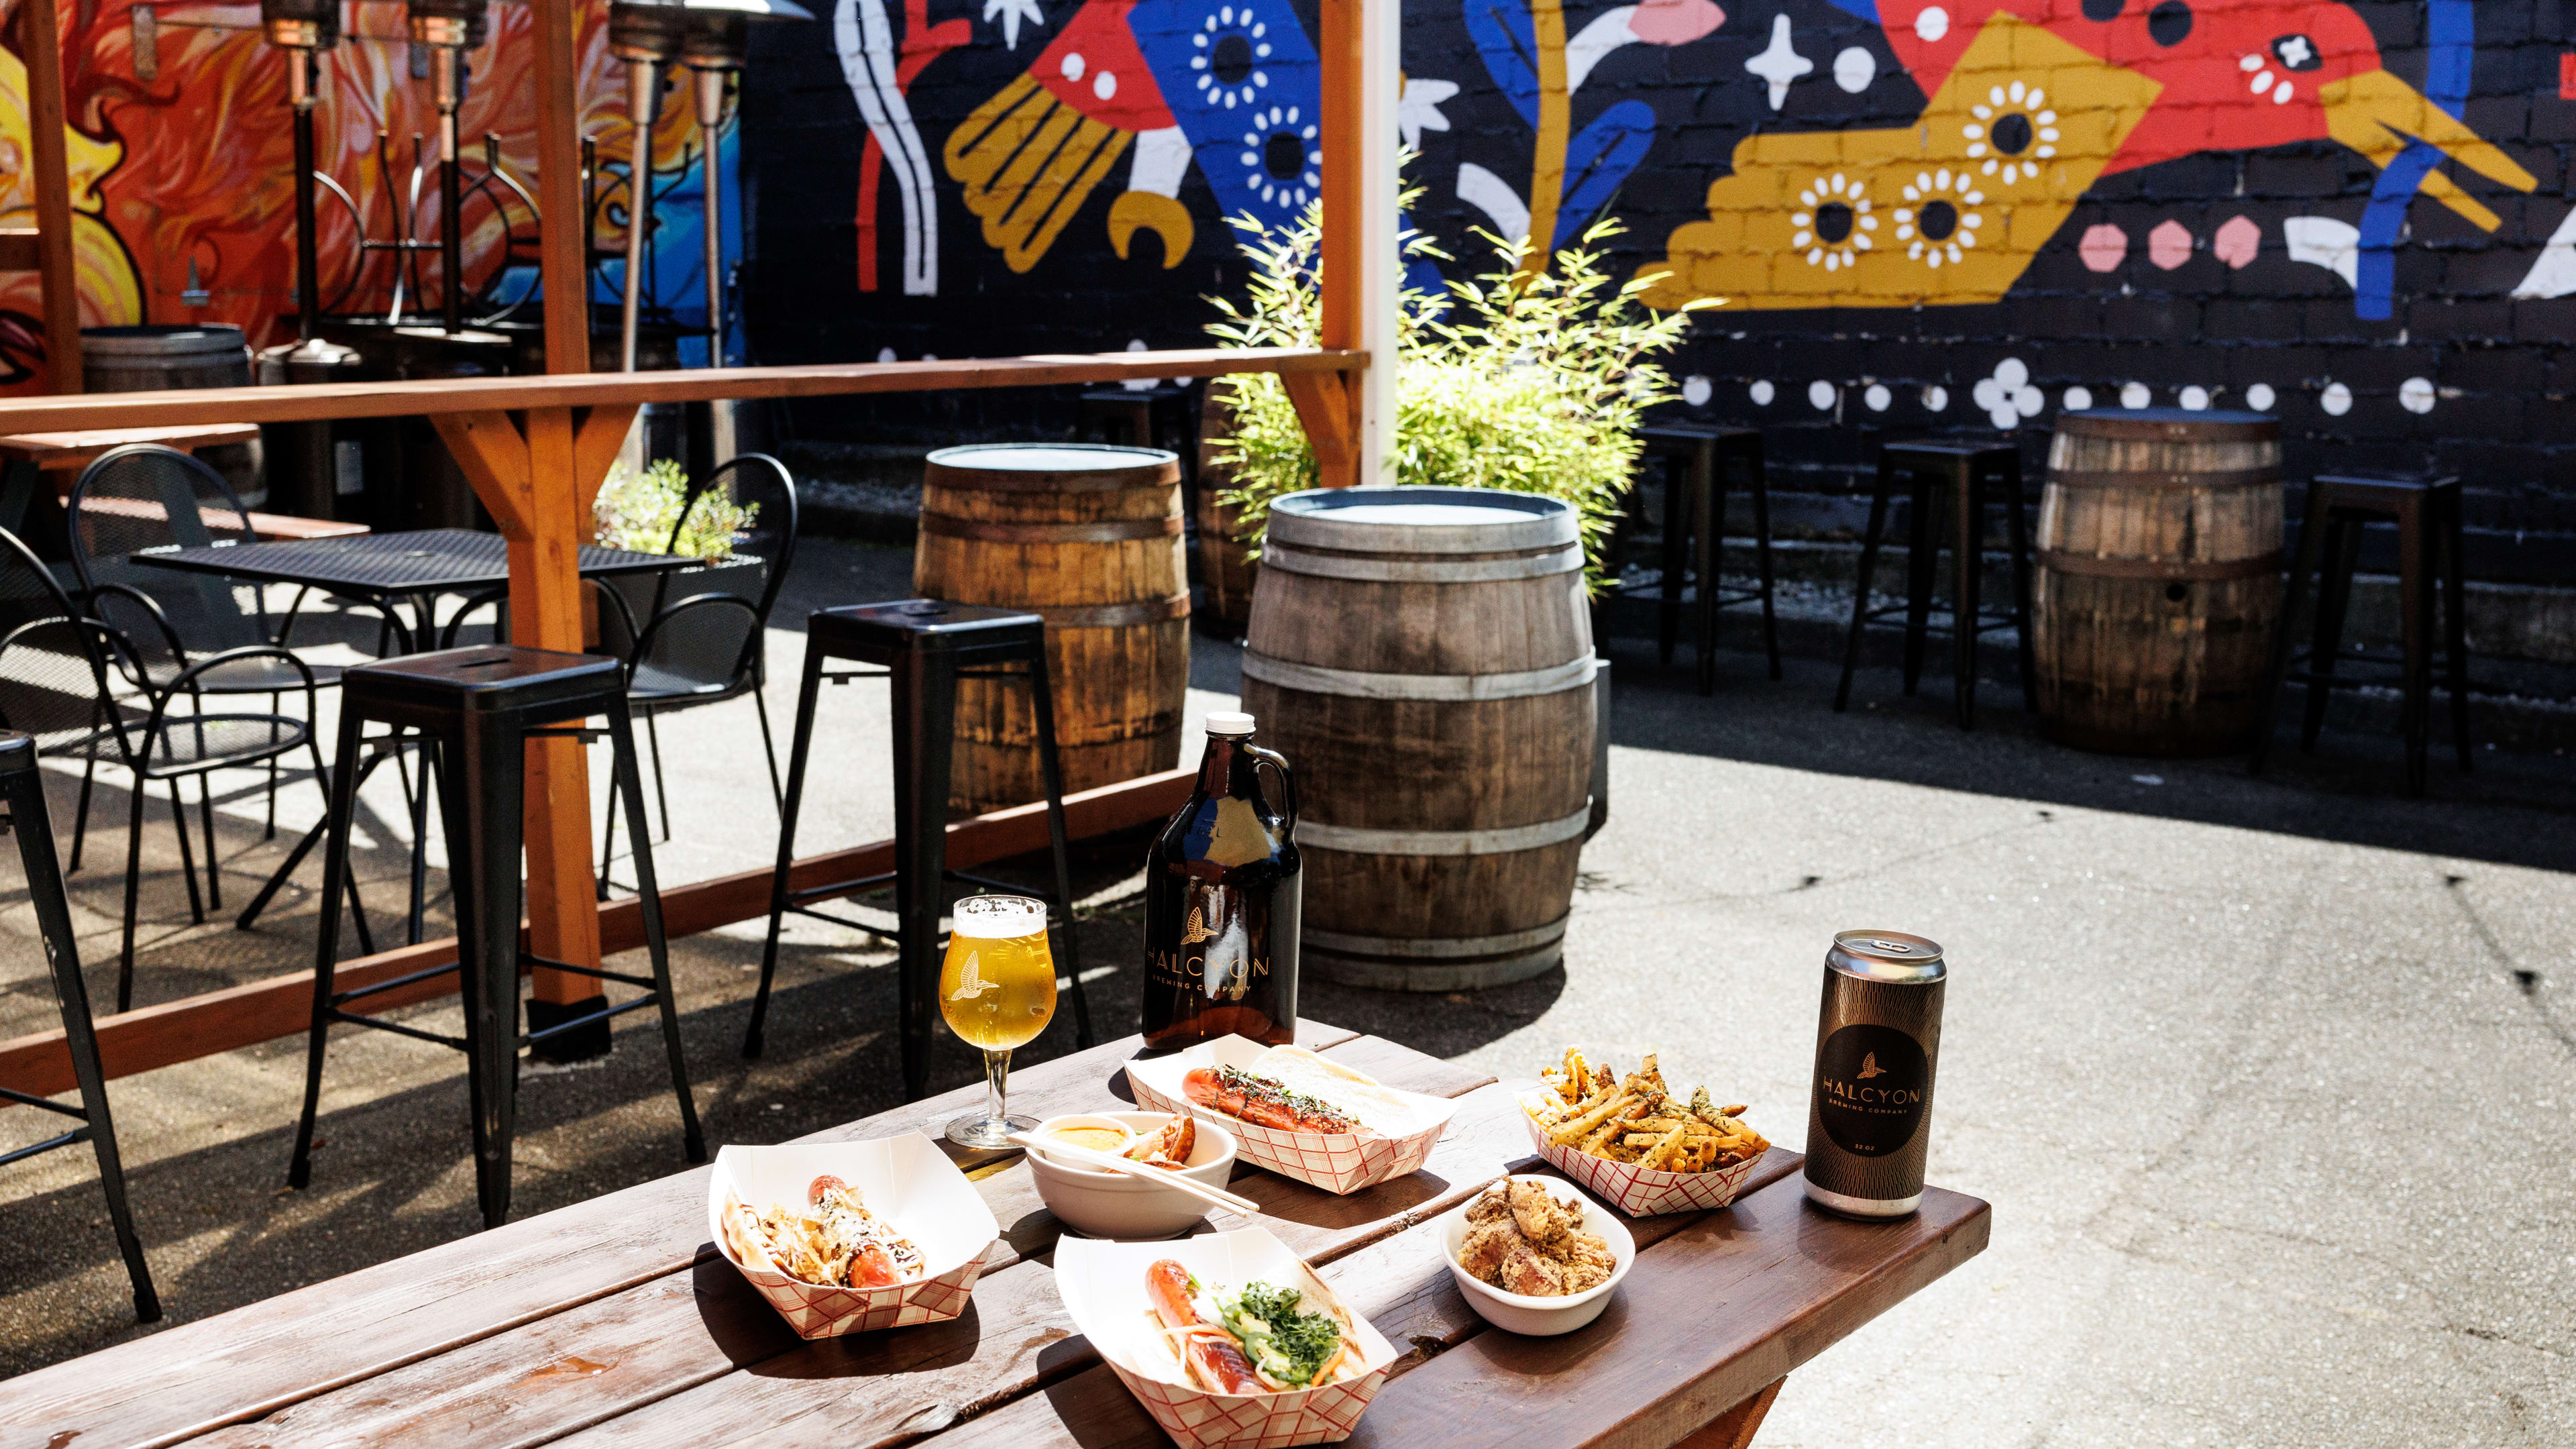 brewery patio with spread of beers and food looking out onto mural